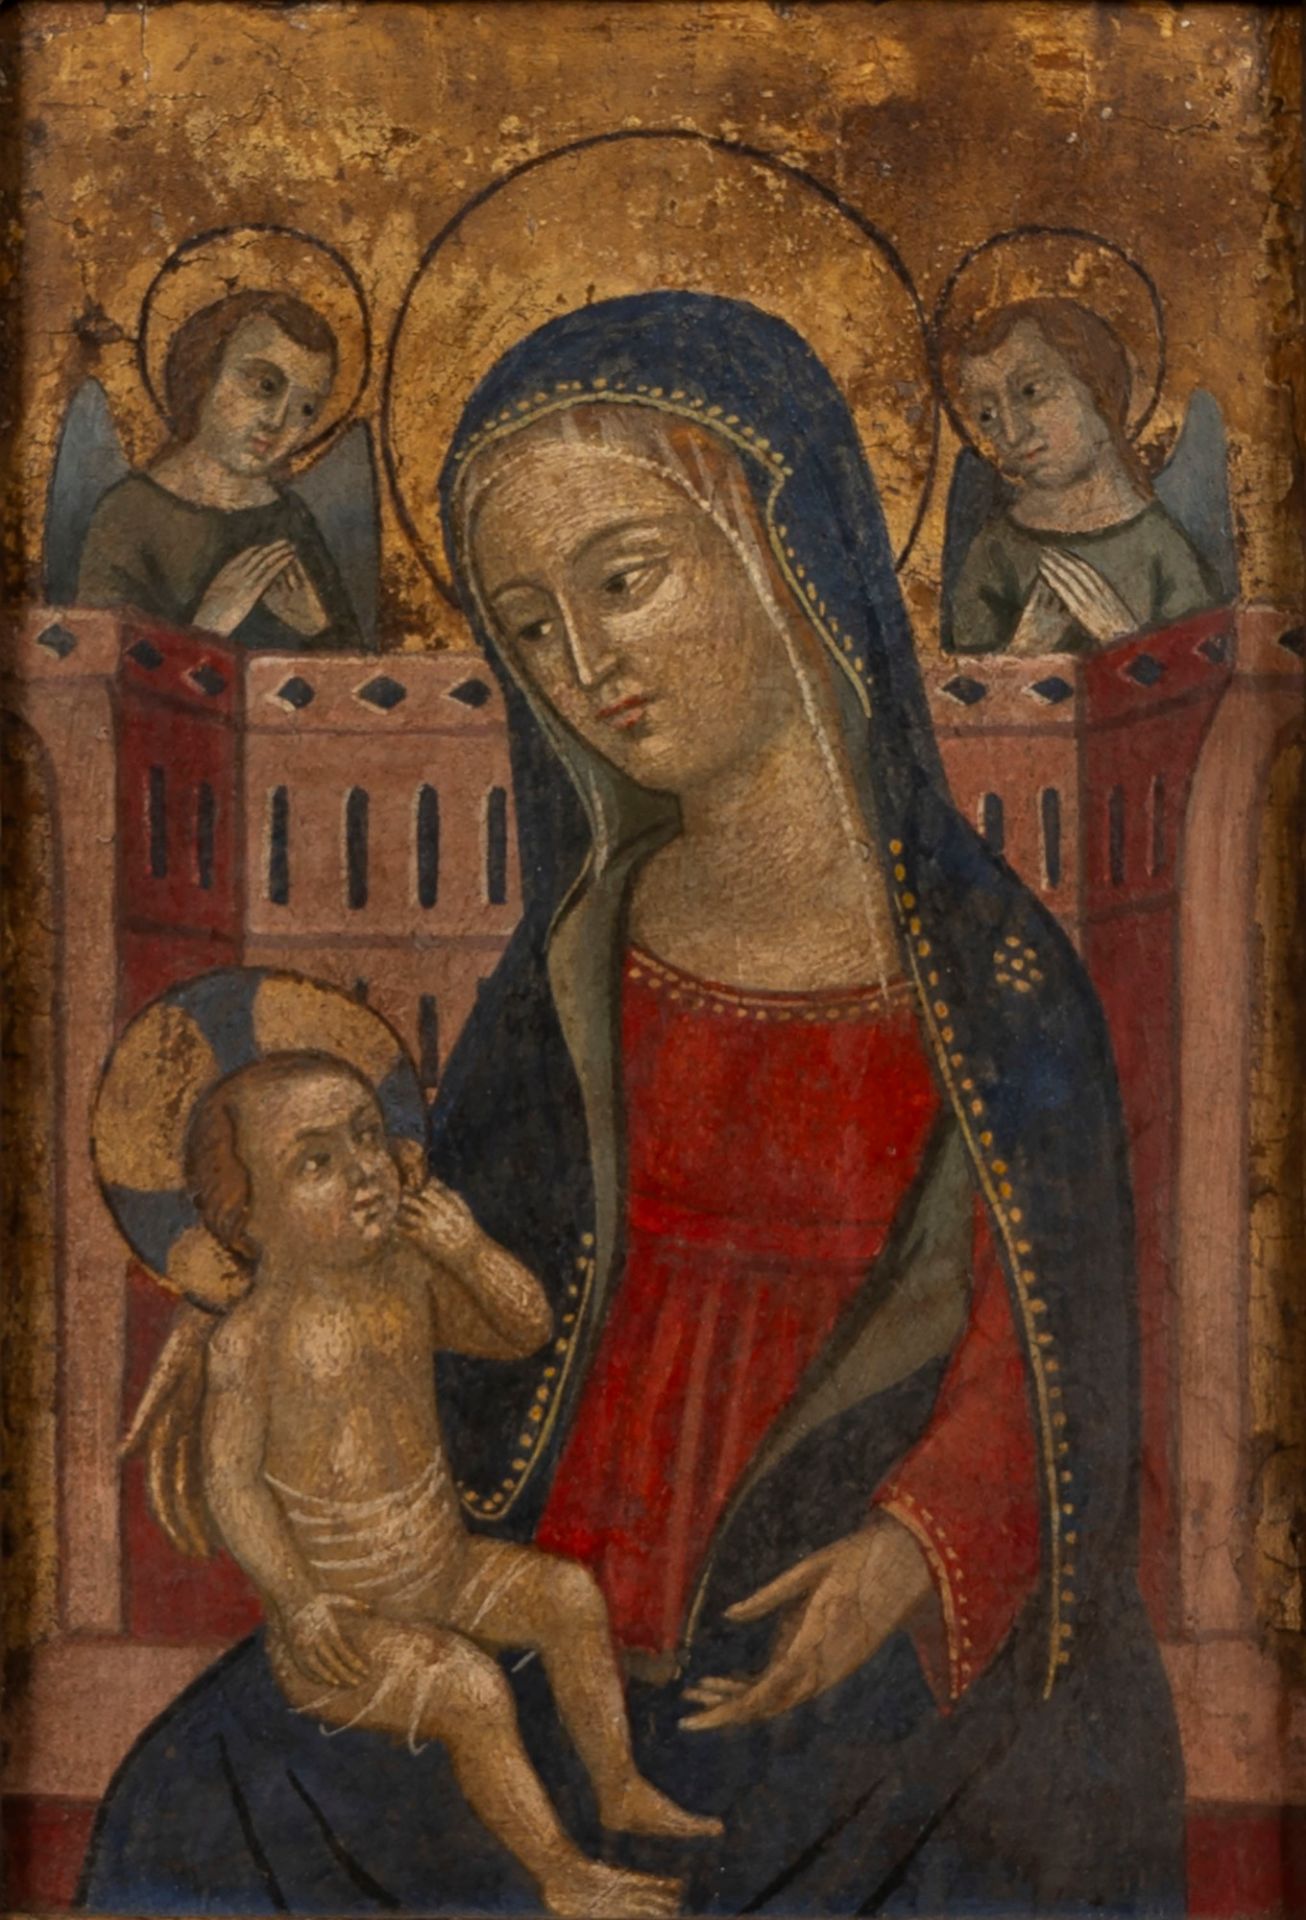 Imitator of Giotto - Madonna with Child and Angels